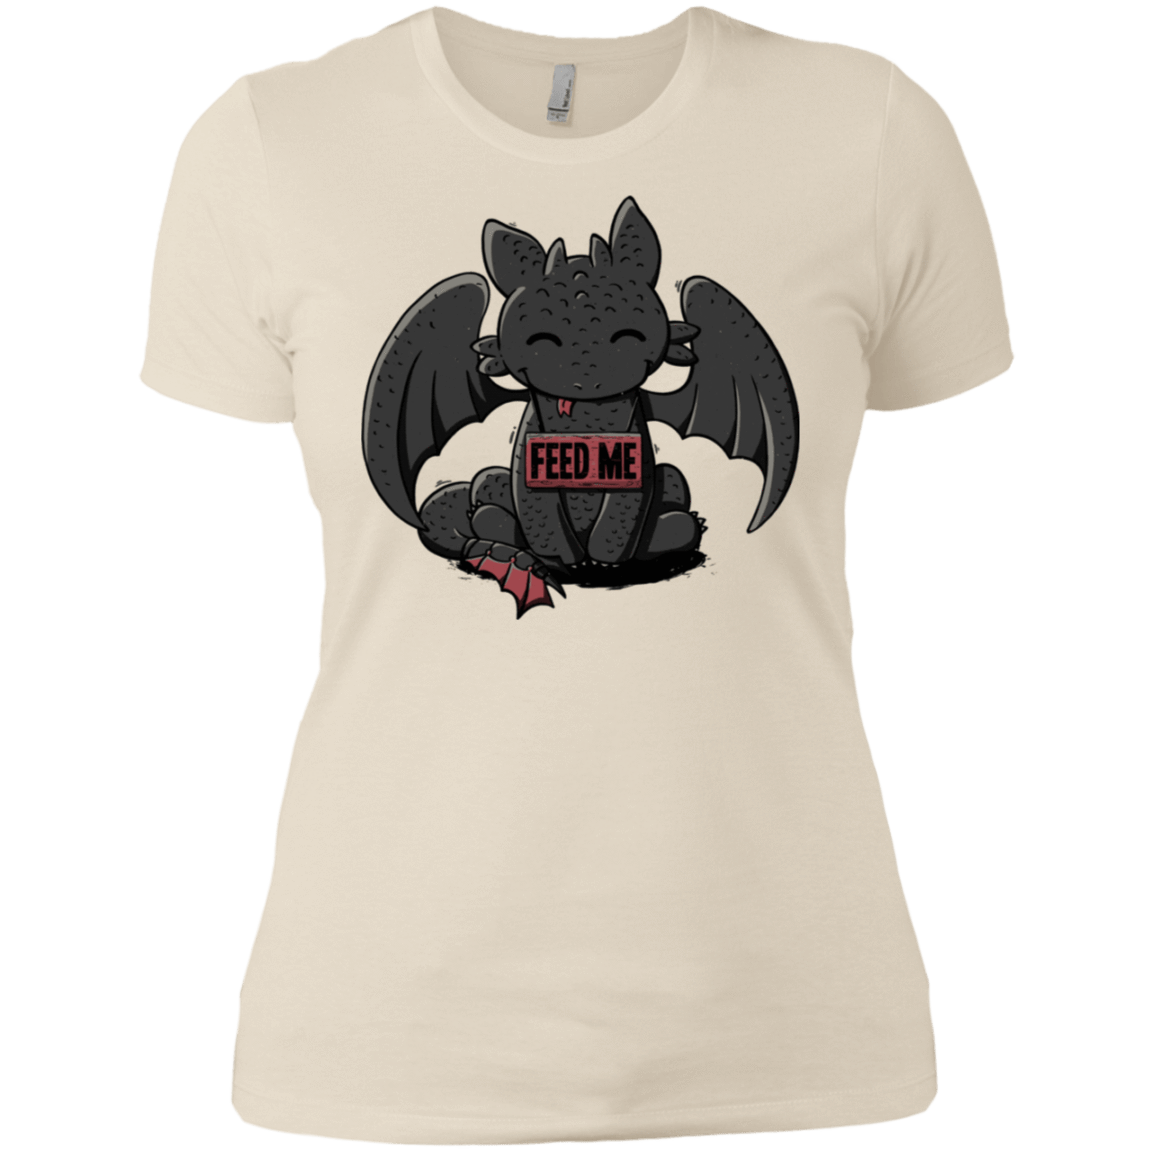 T-Shirts Ivory/ / X-Small Toothless Feed Me Women's Premium T-Shirt